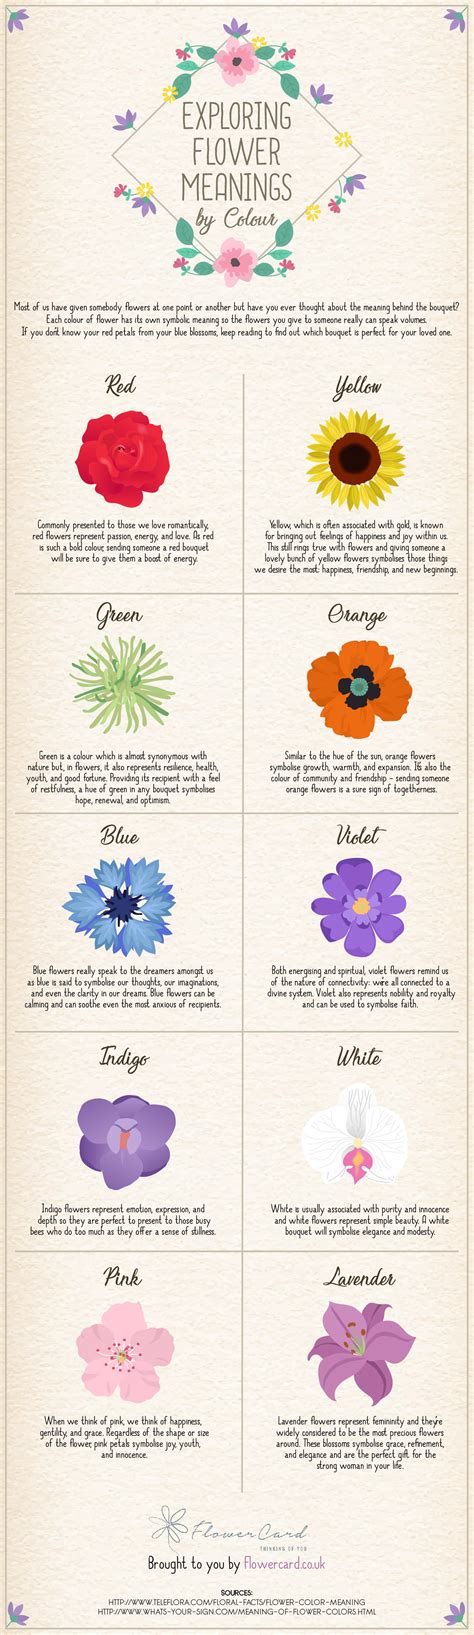 Exploring Flower Meanings By Colour Infographic Flowercard